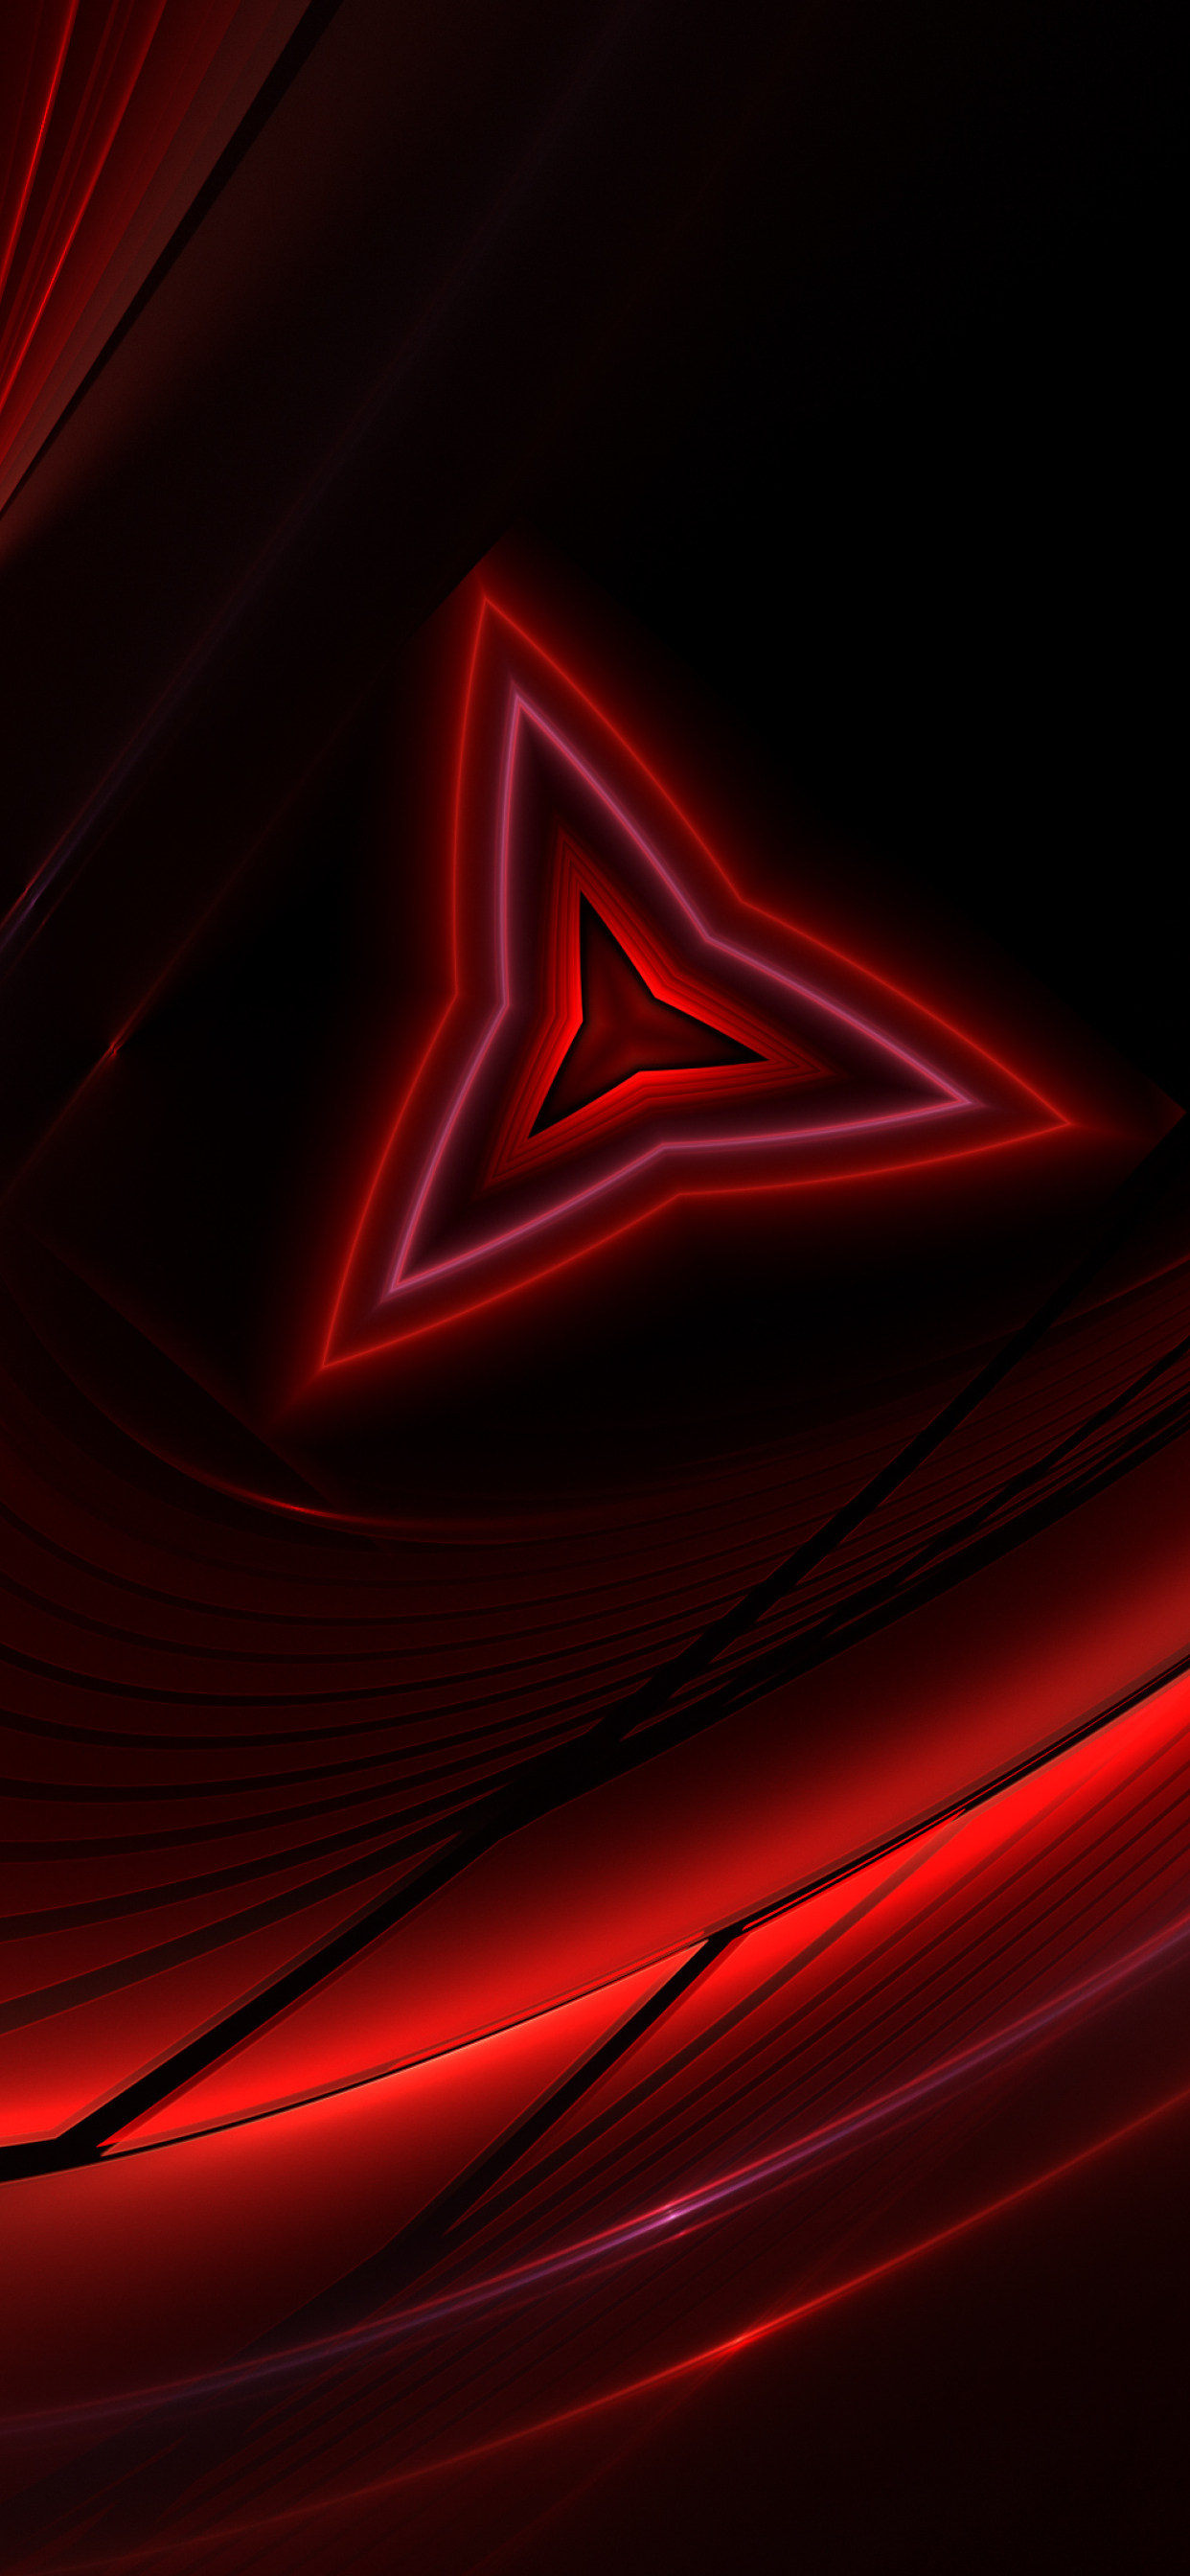 1242x26 Autodrom Red Art Iphone Xs Max Wallpaper Hd Abstract 4k Wallpapers Images Photos And Background Wallpapers Den